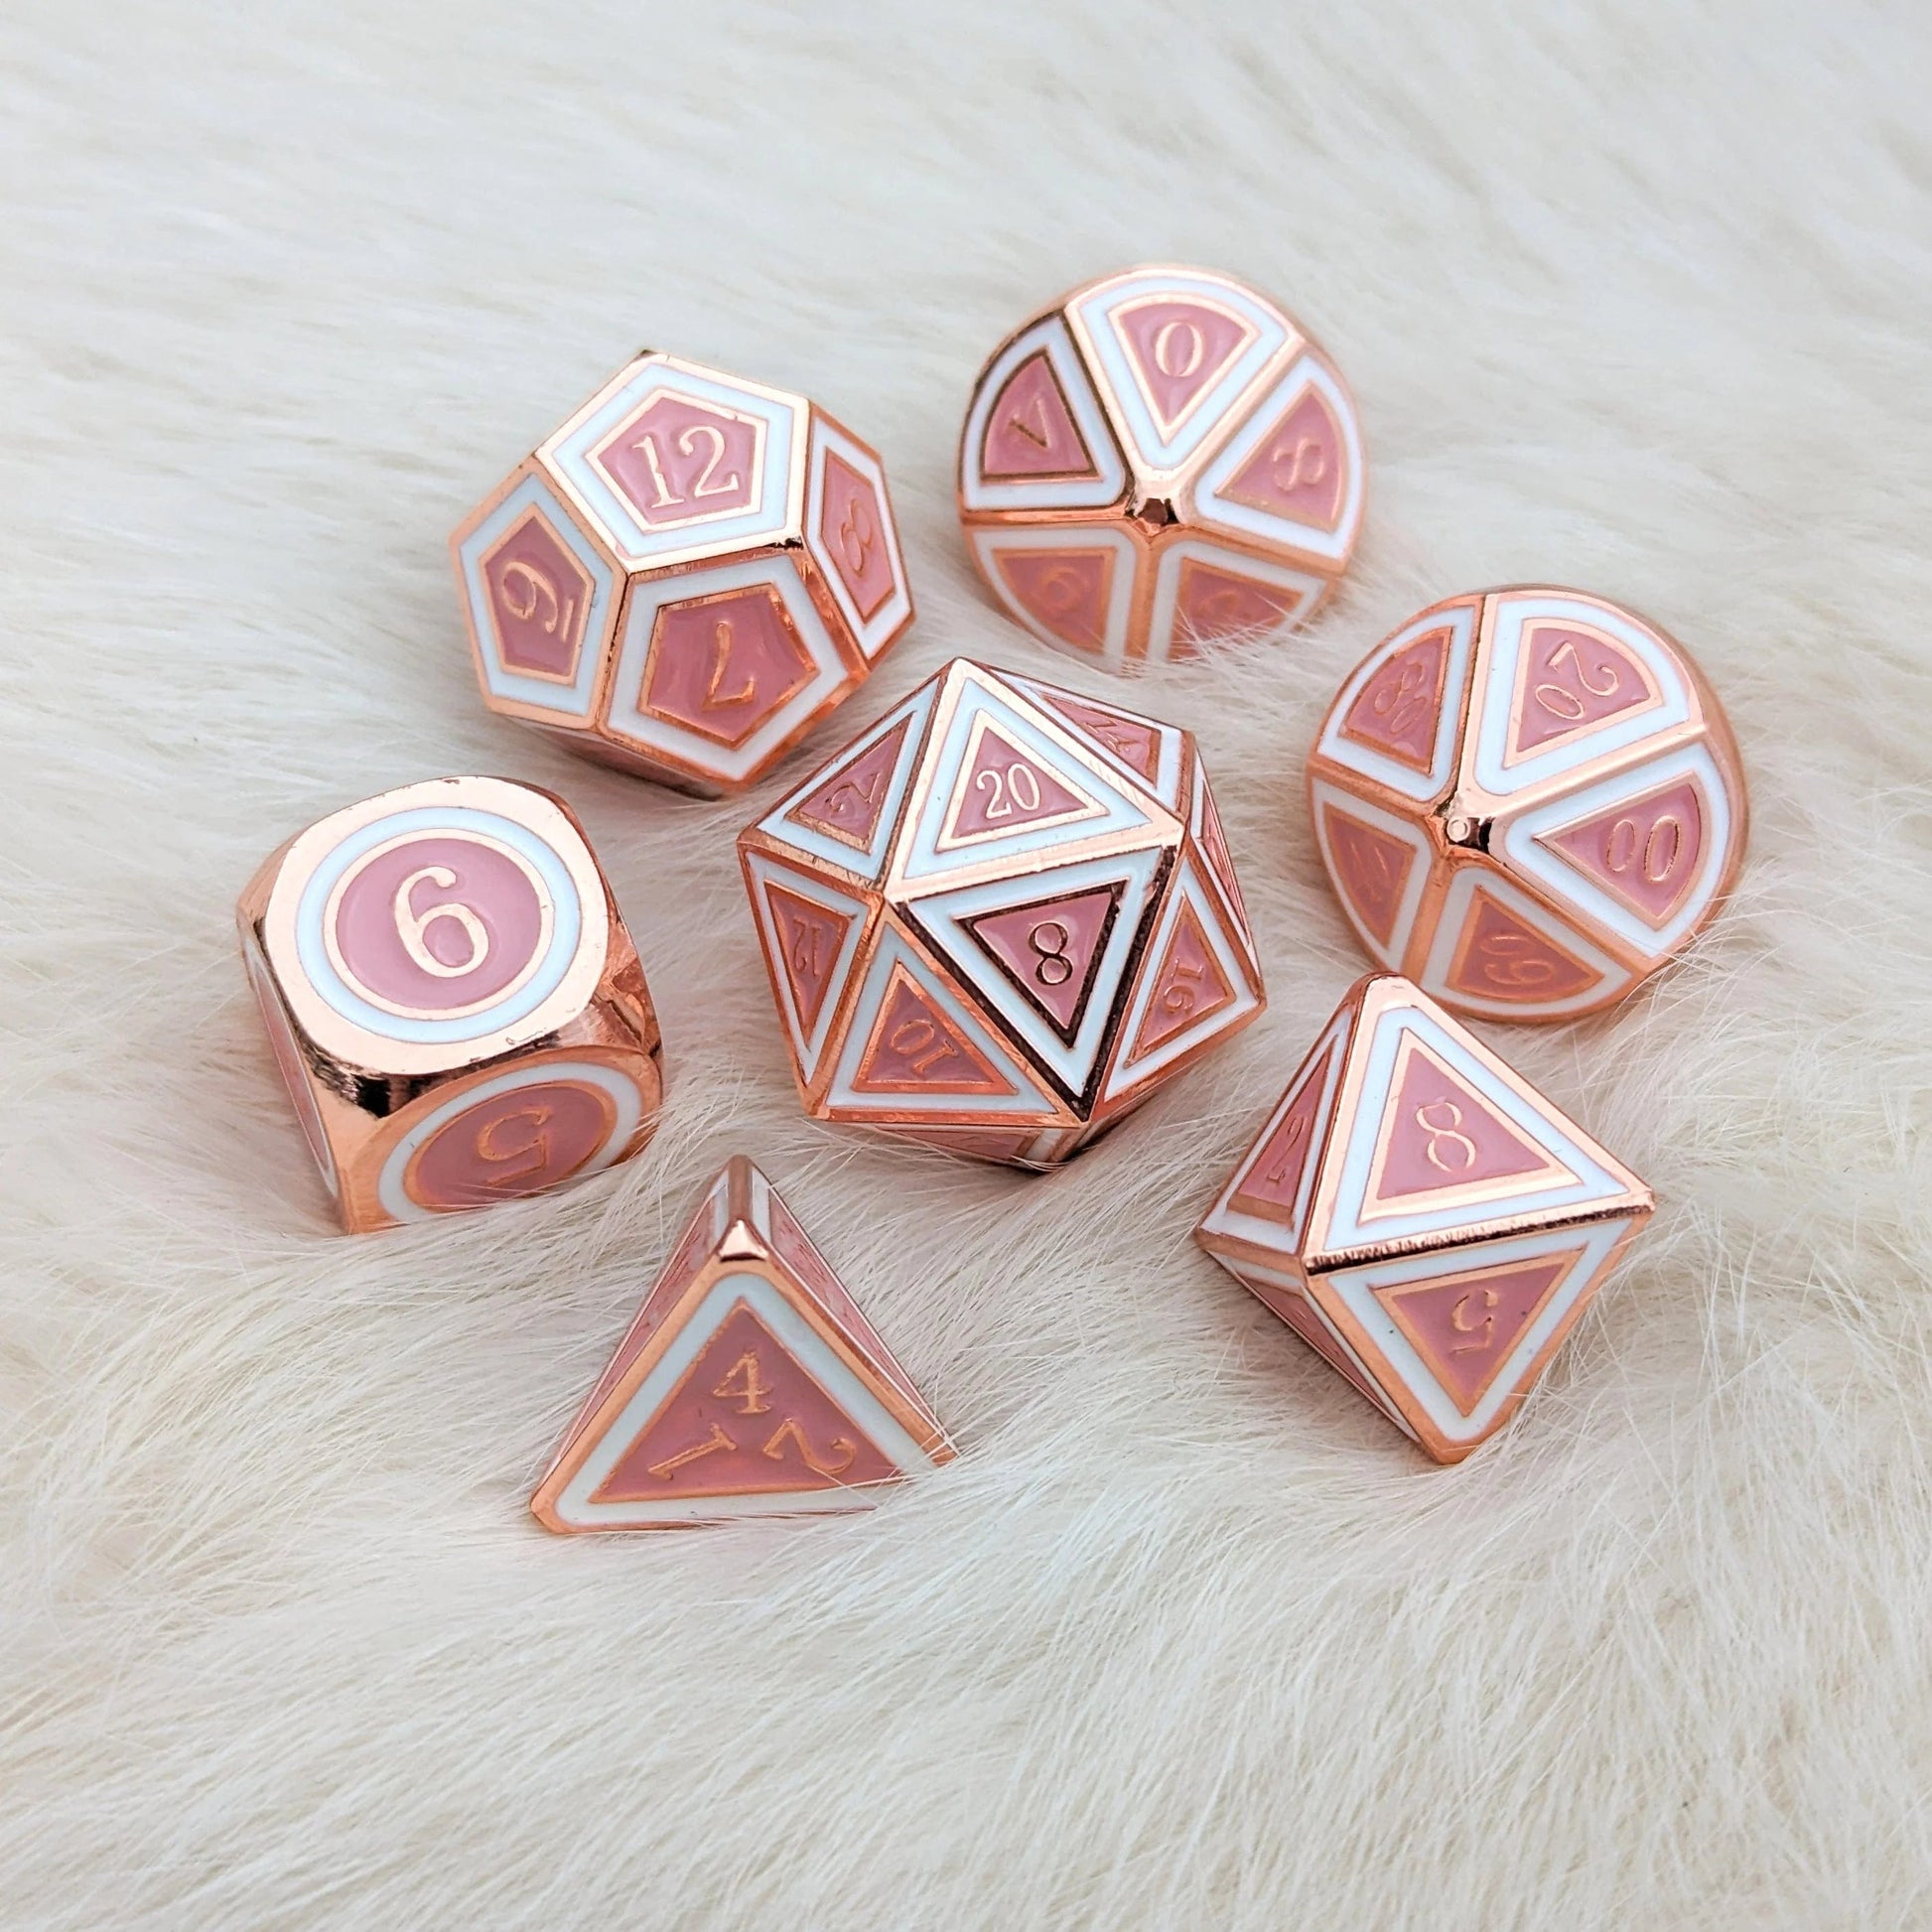 Ostara Metal Dice (Copper Plated Pink and White) - 7 Piece Set - The Fourth Place